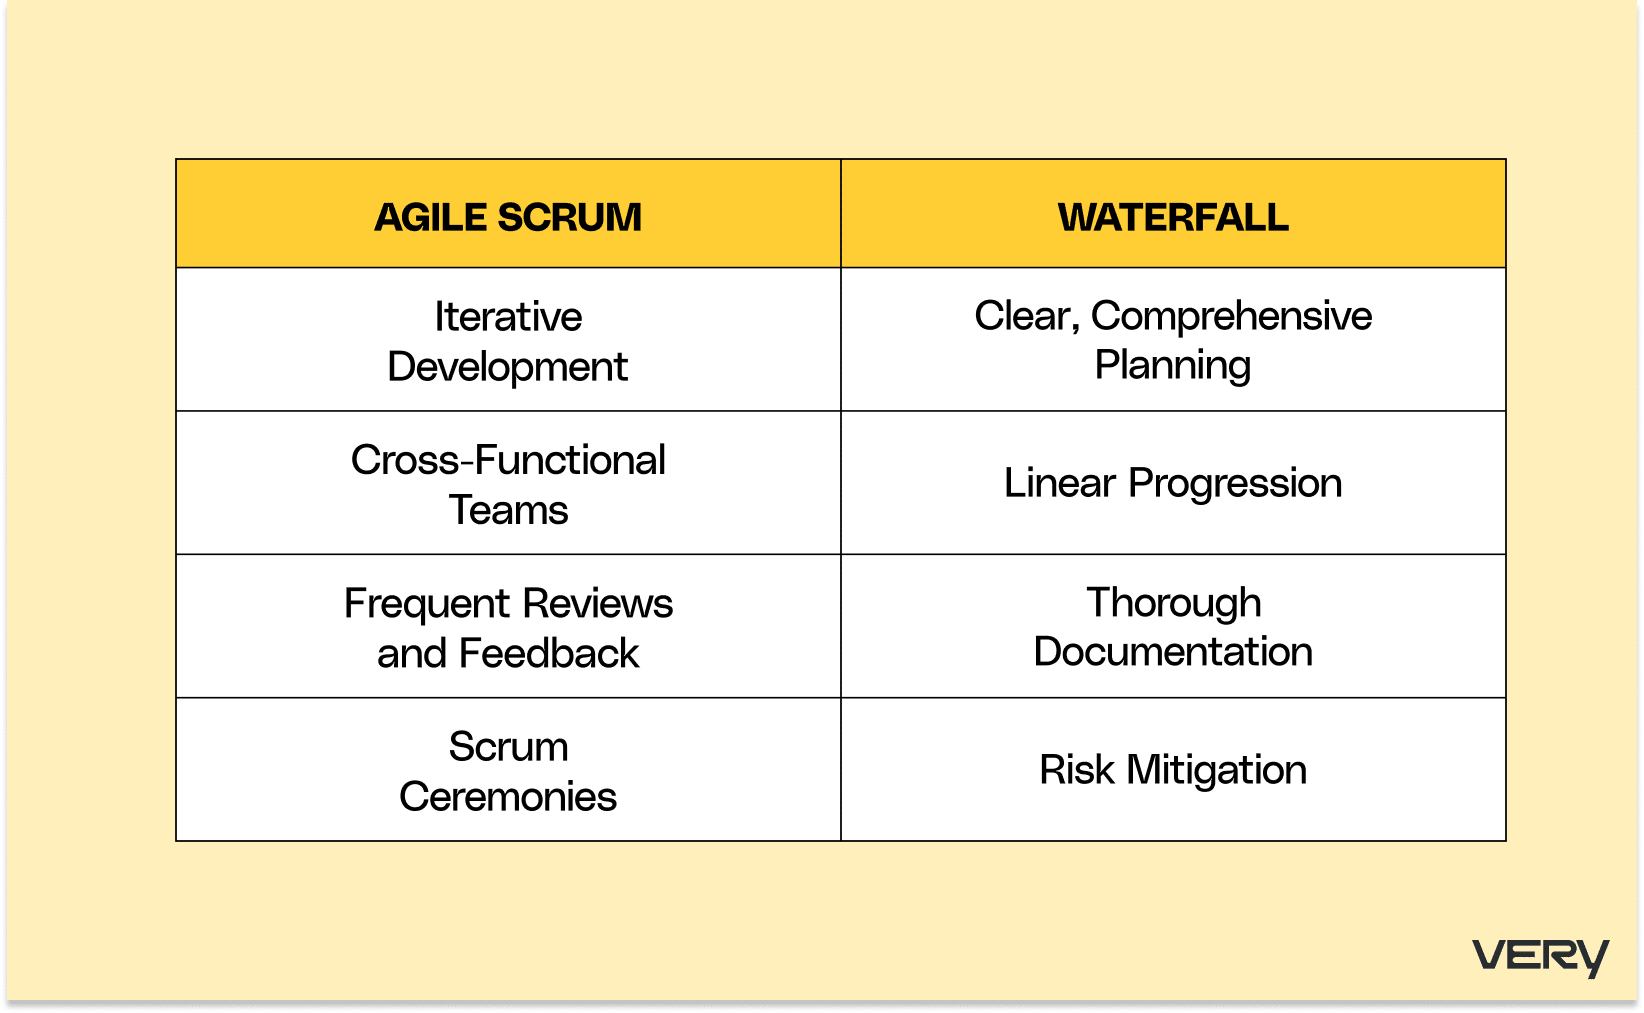 Agile scrum vs waterfall for IoT product management: a comparison.